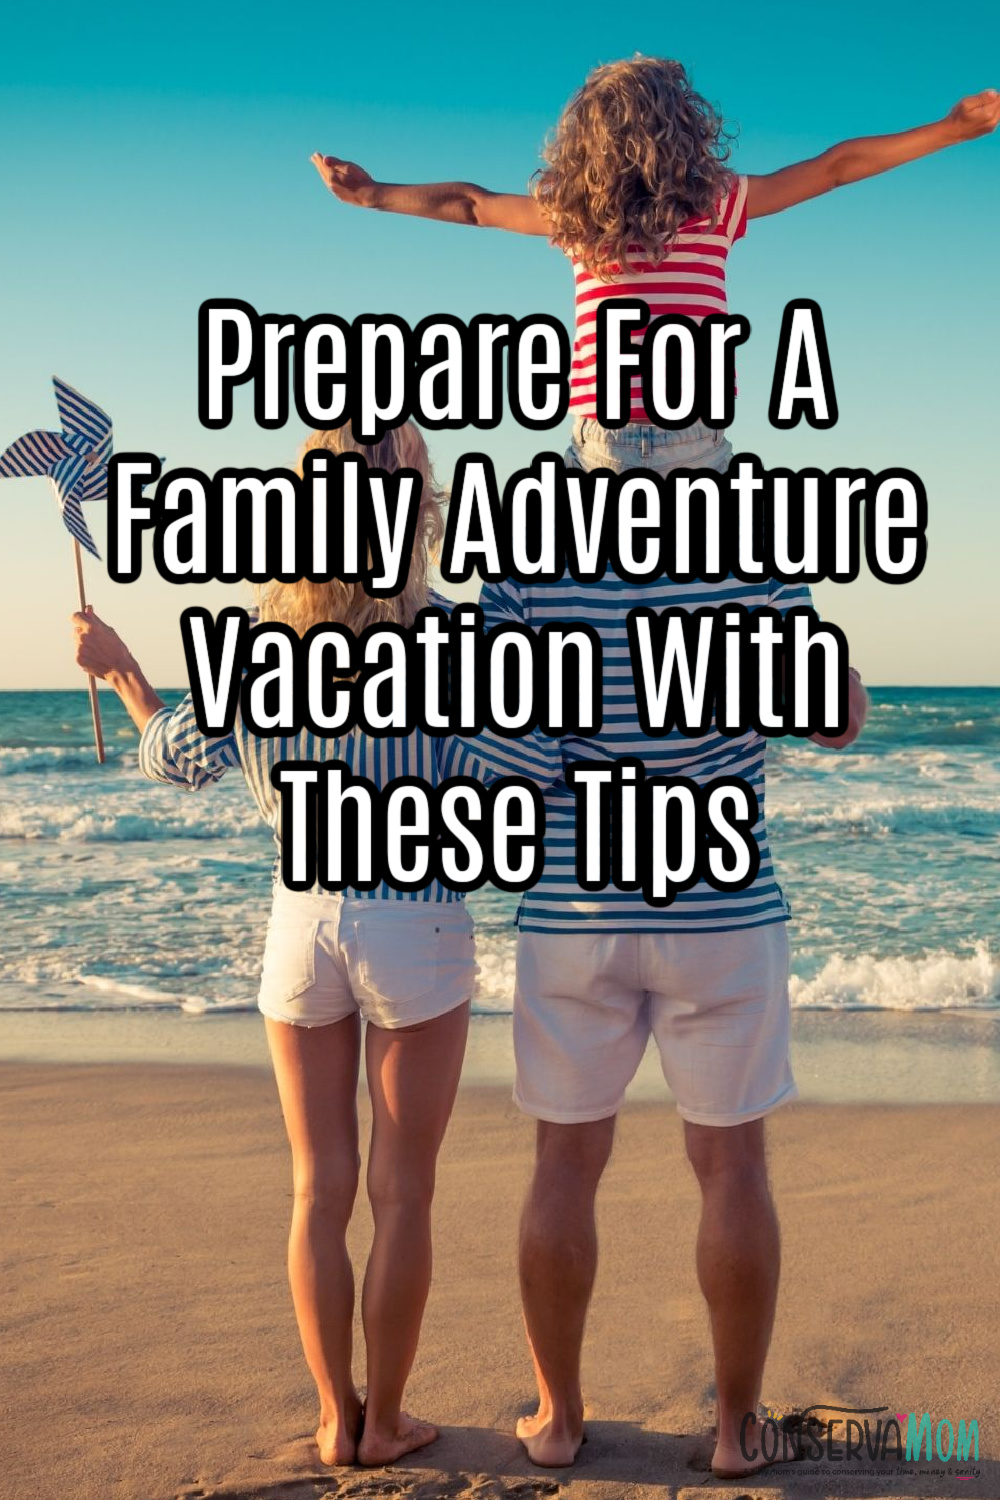 Prepare For A Family Adventure Vacation With These Tips (3)